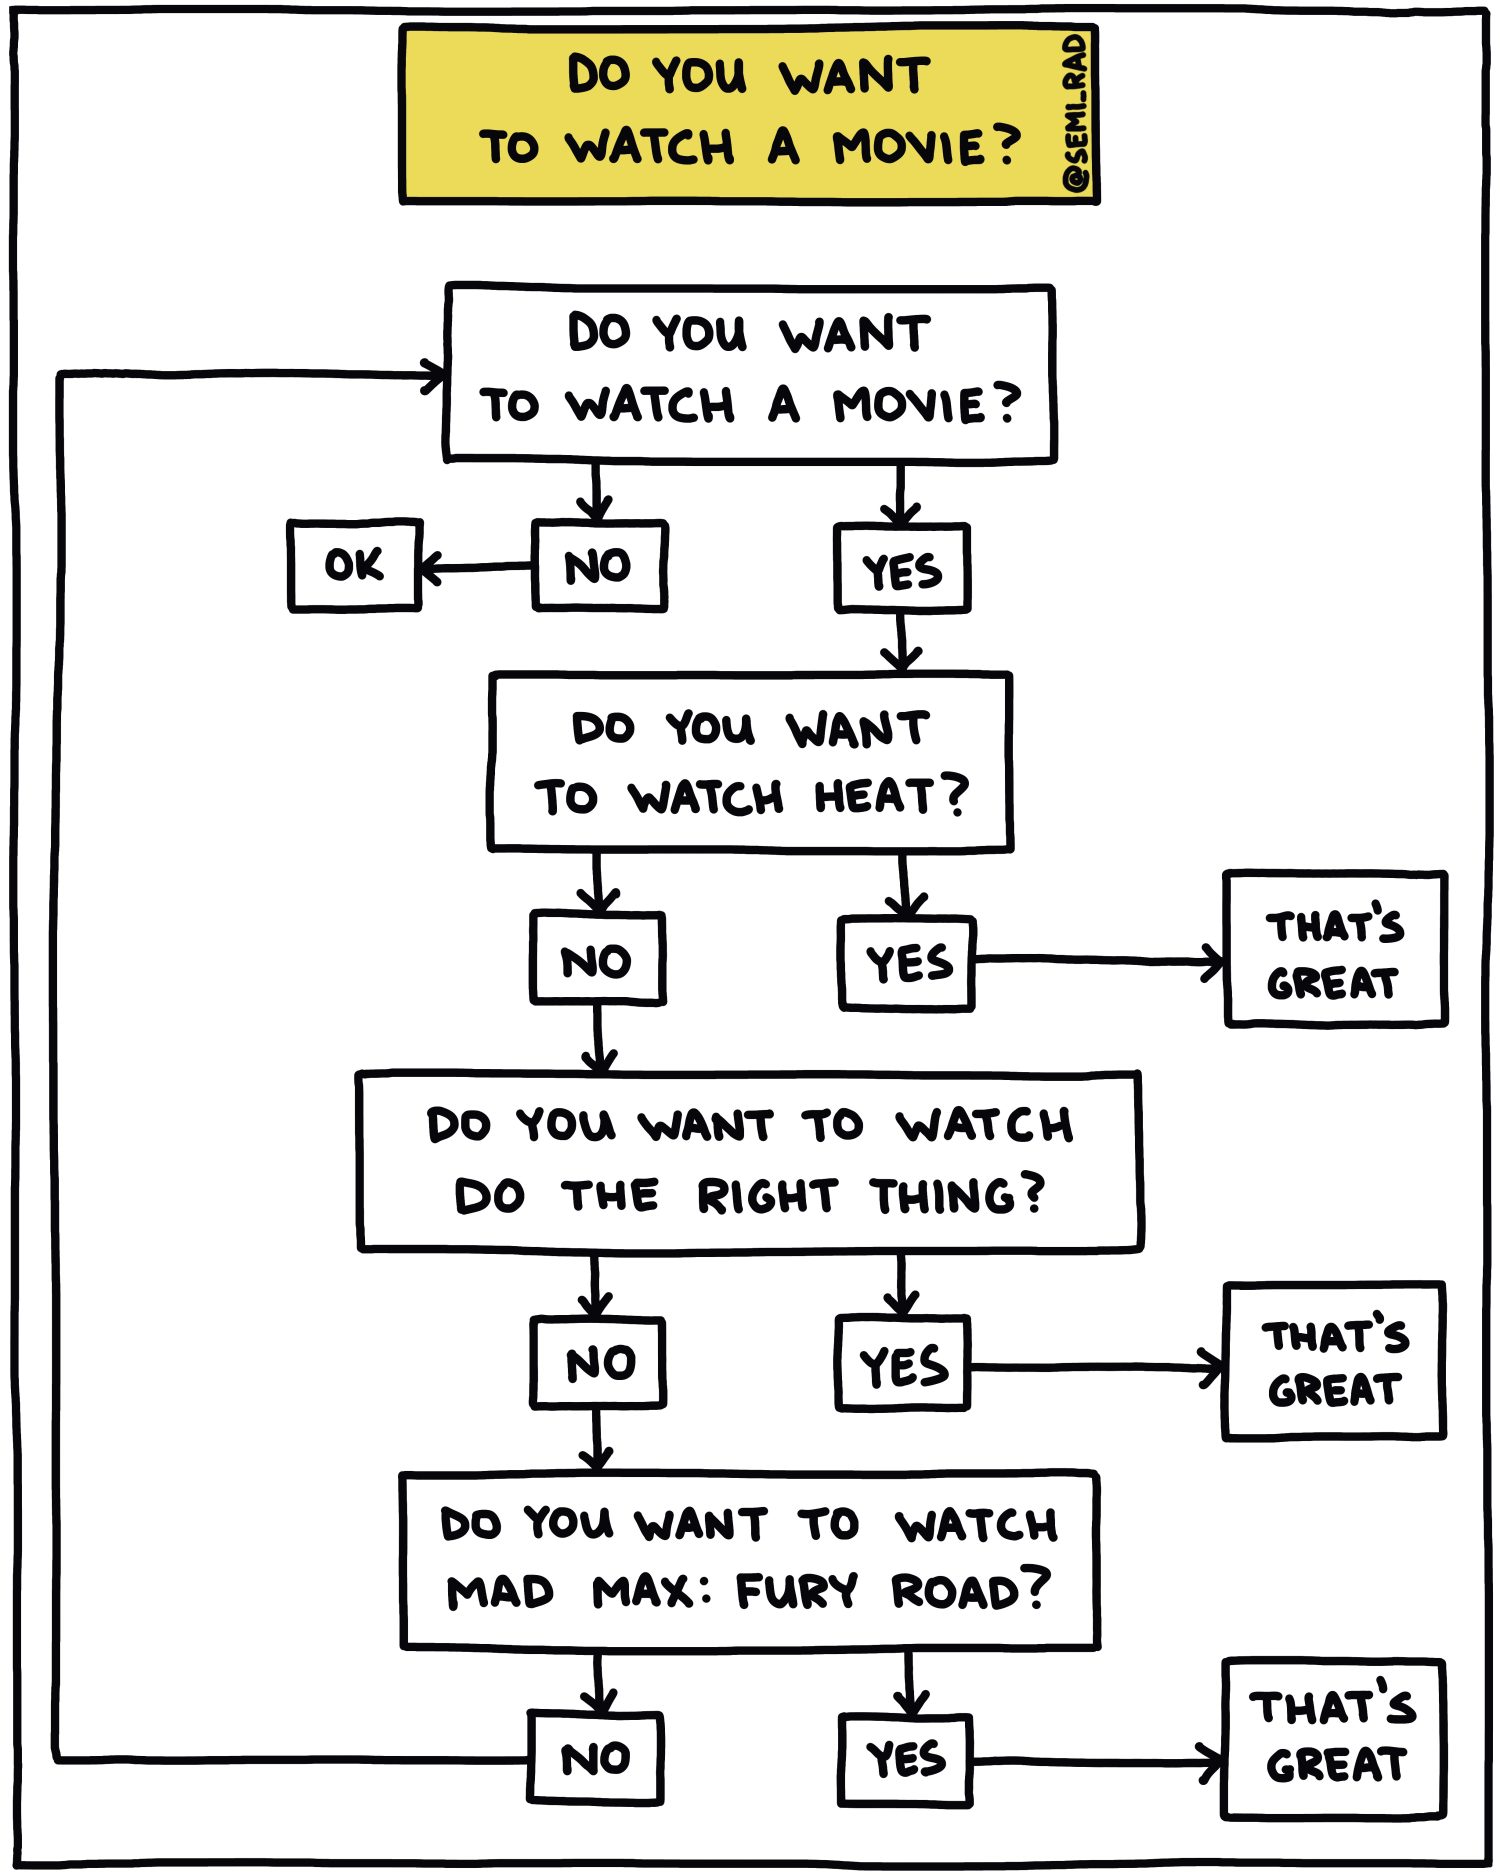 Do You Want To Watch A Movie?